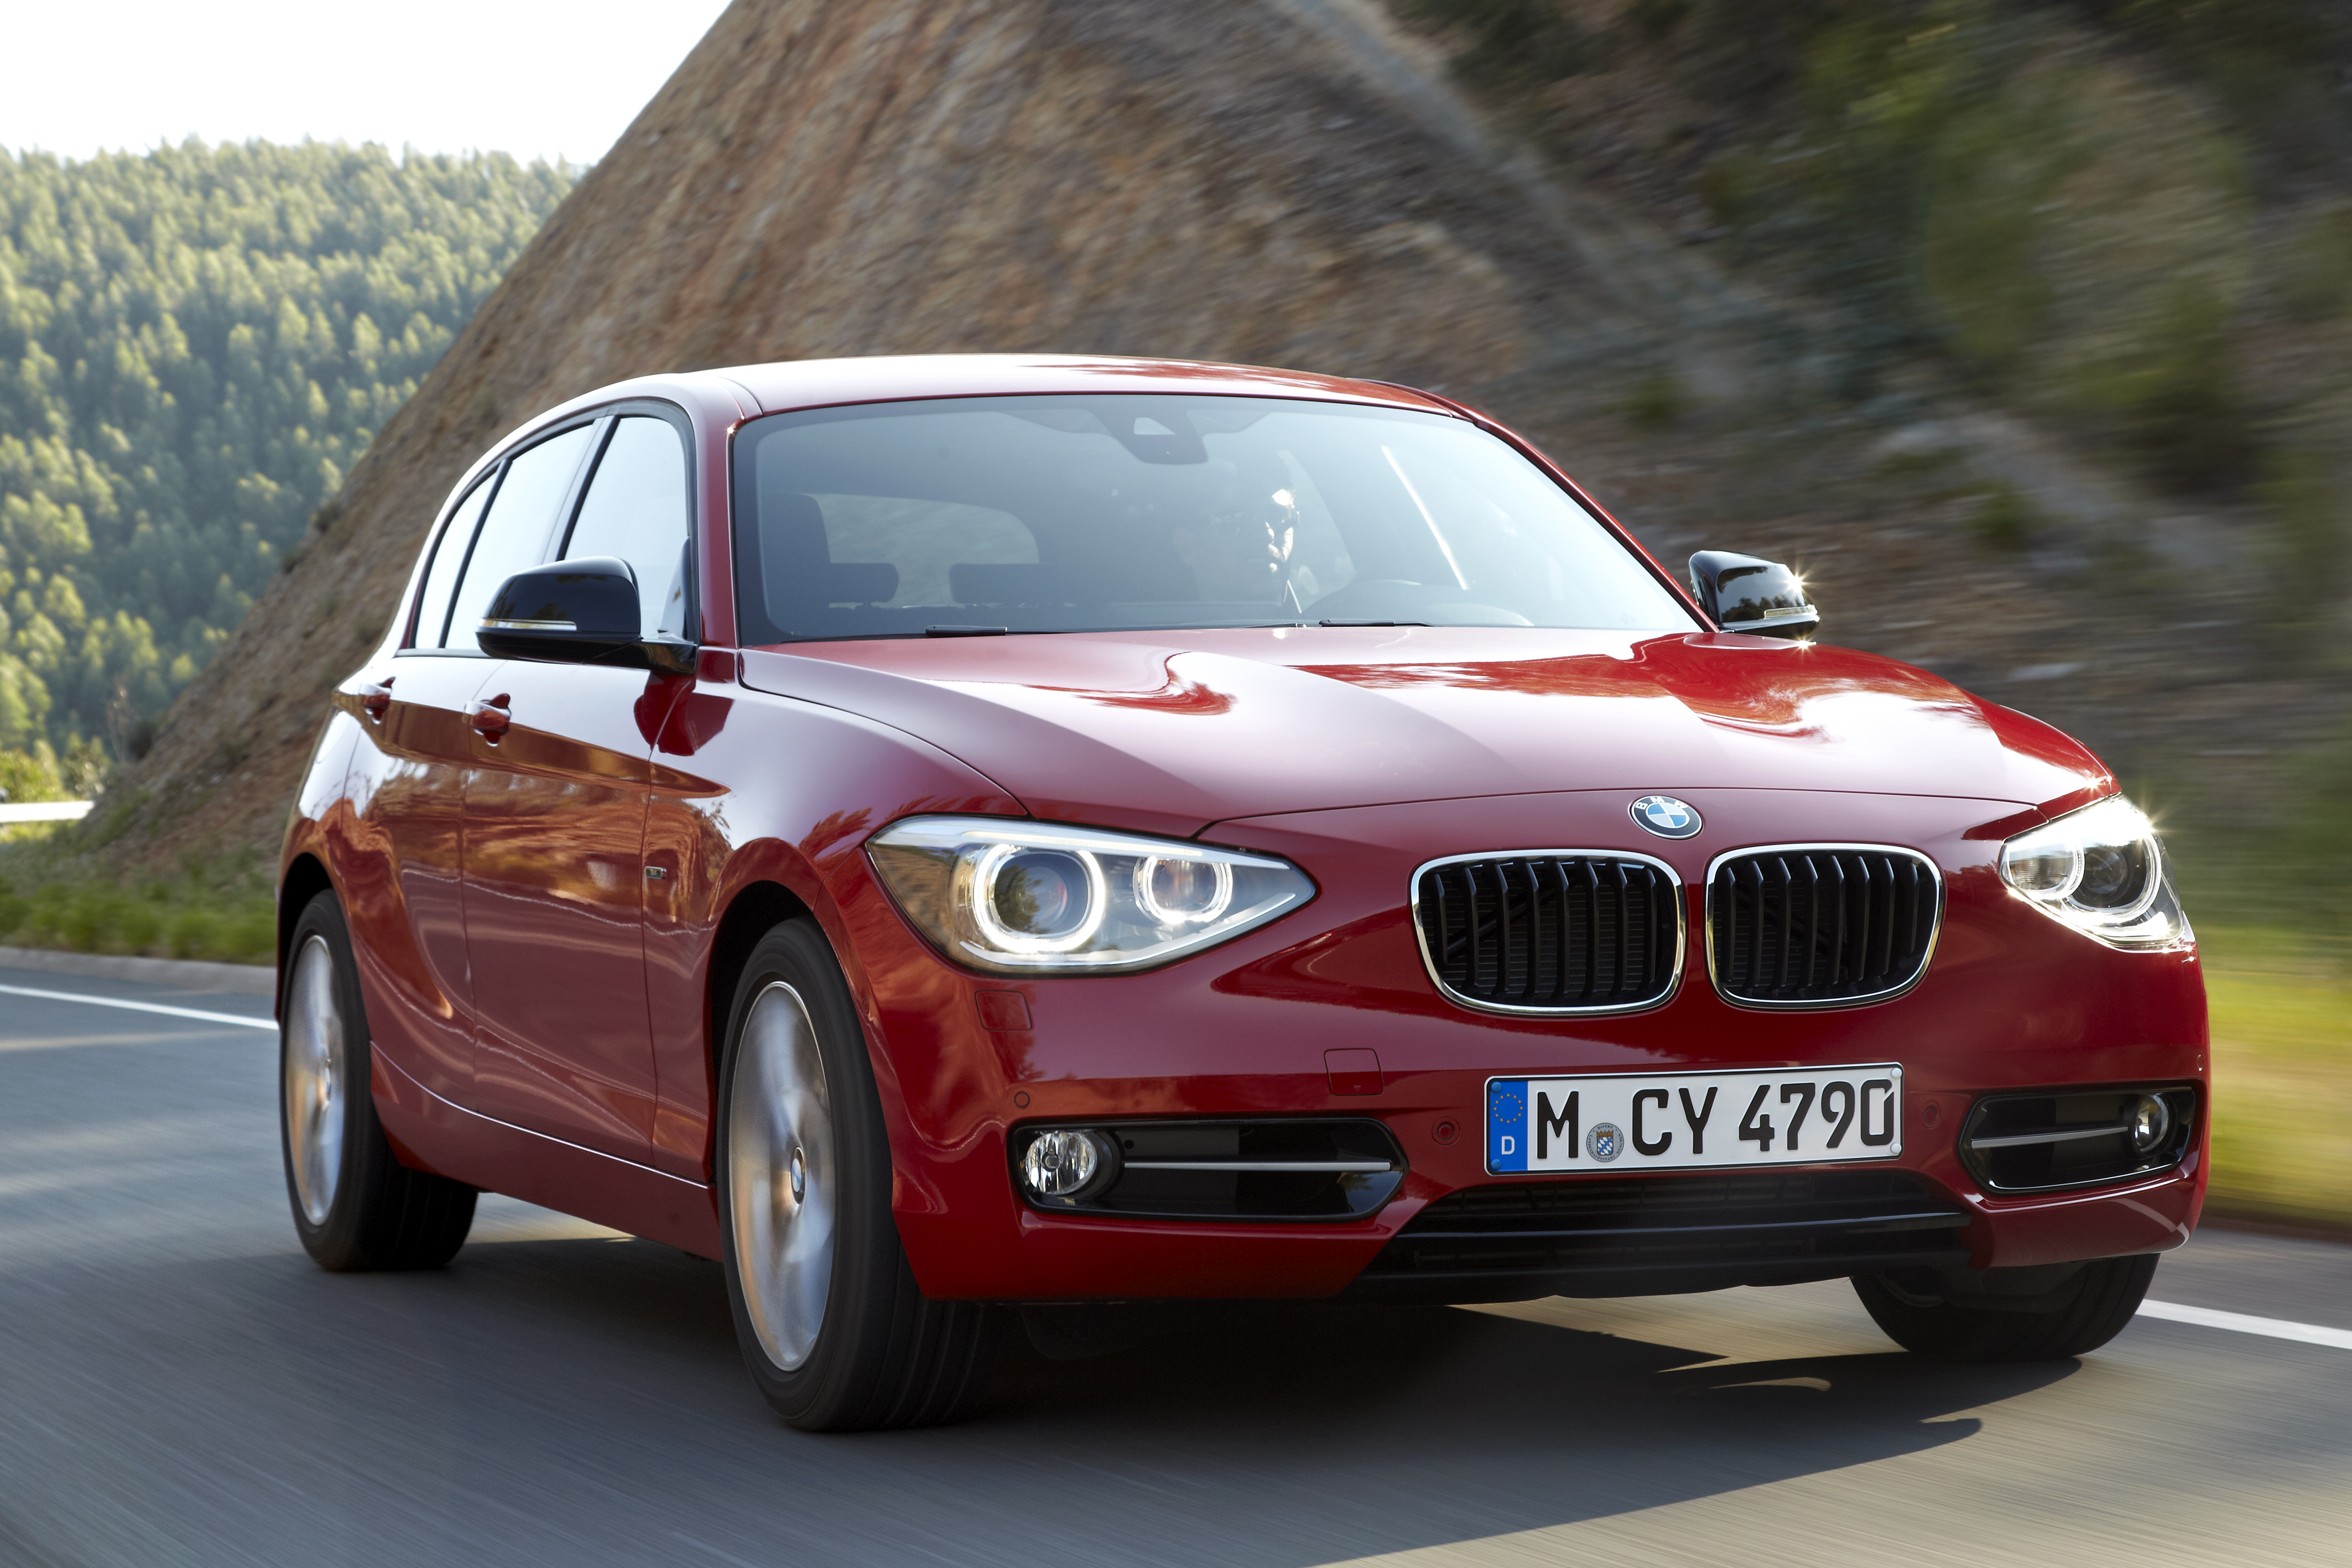 2012 BMW 1Series (F20) unveiled details and photos The